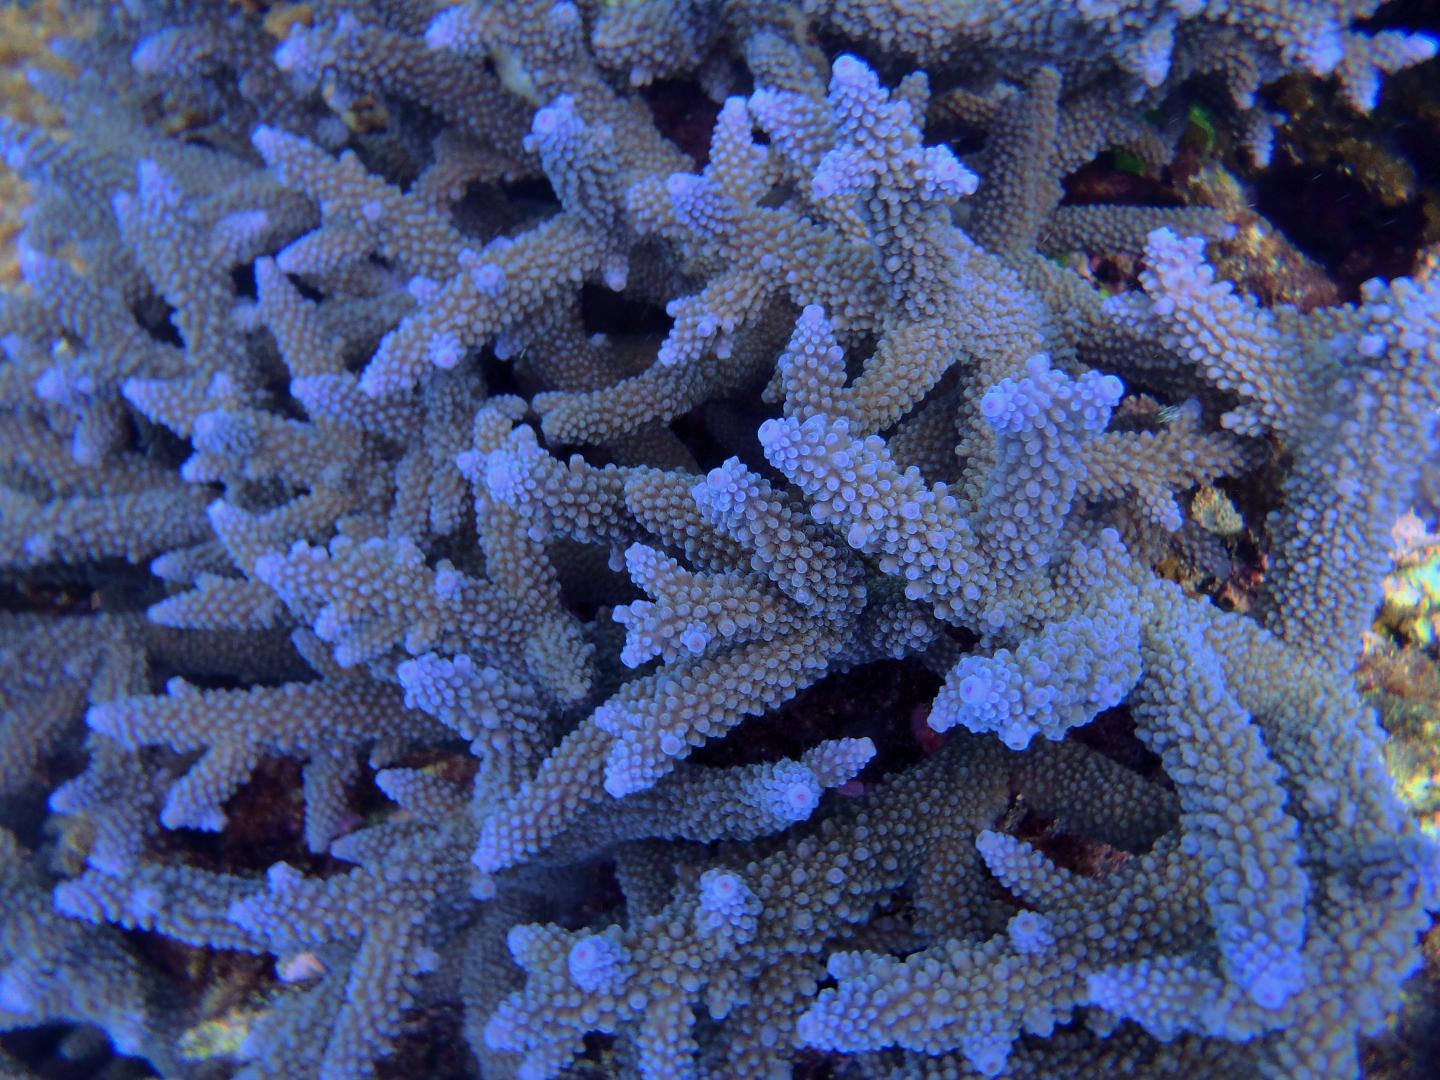 Coral Photographed by Researchers